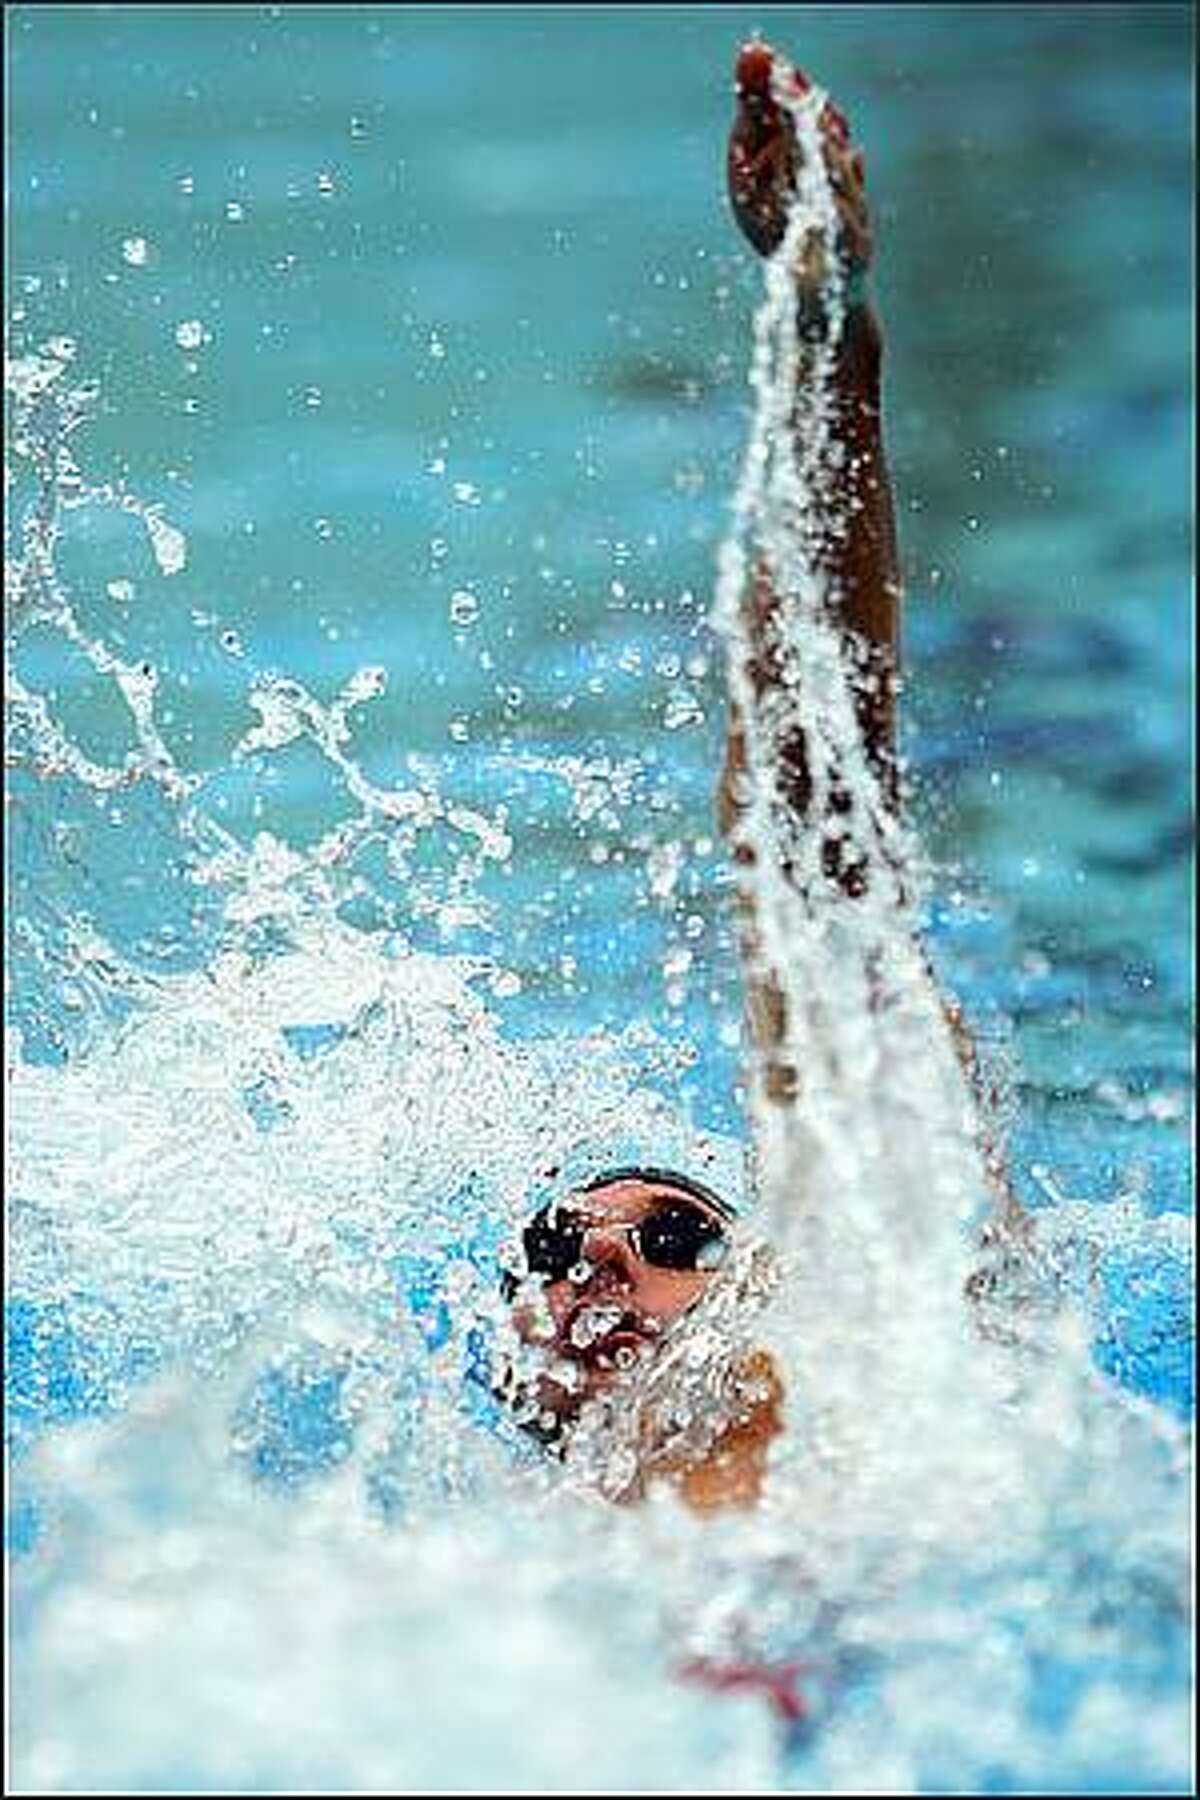 Aaron Peirsol of the United States competes in the Men's 200m Backstroke Semifinal 1 held at the National Aquatics Centre during Day 6 of the Beijing 2008 Olympic Games in Beijing, China. (Photo by Clive Brunskill/Getty Images)